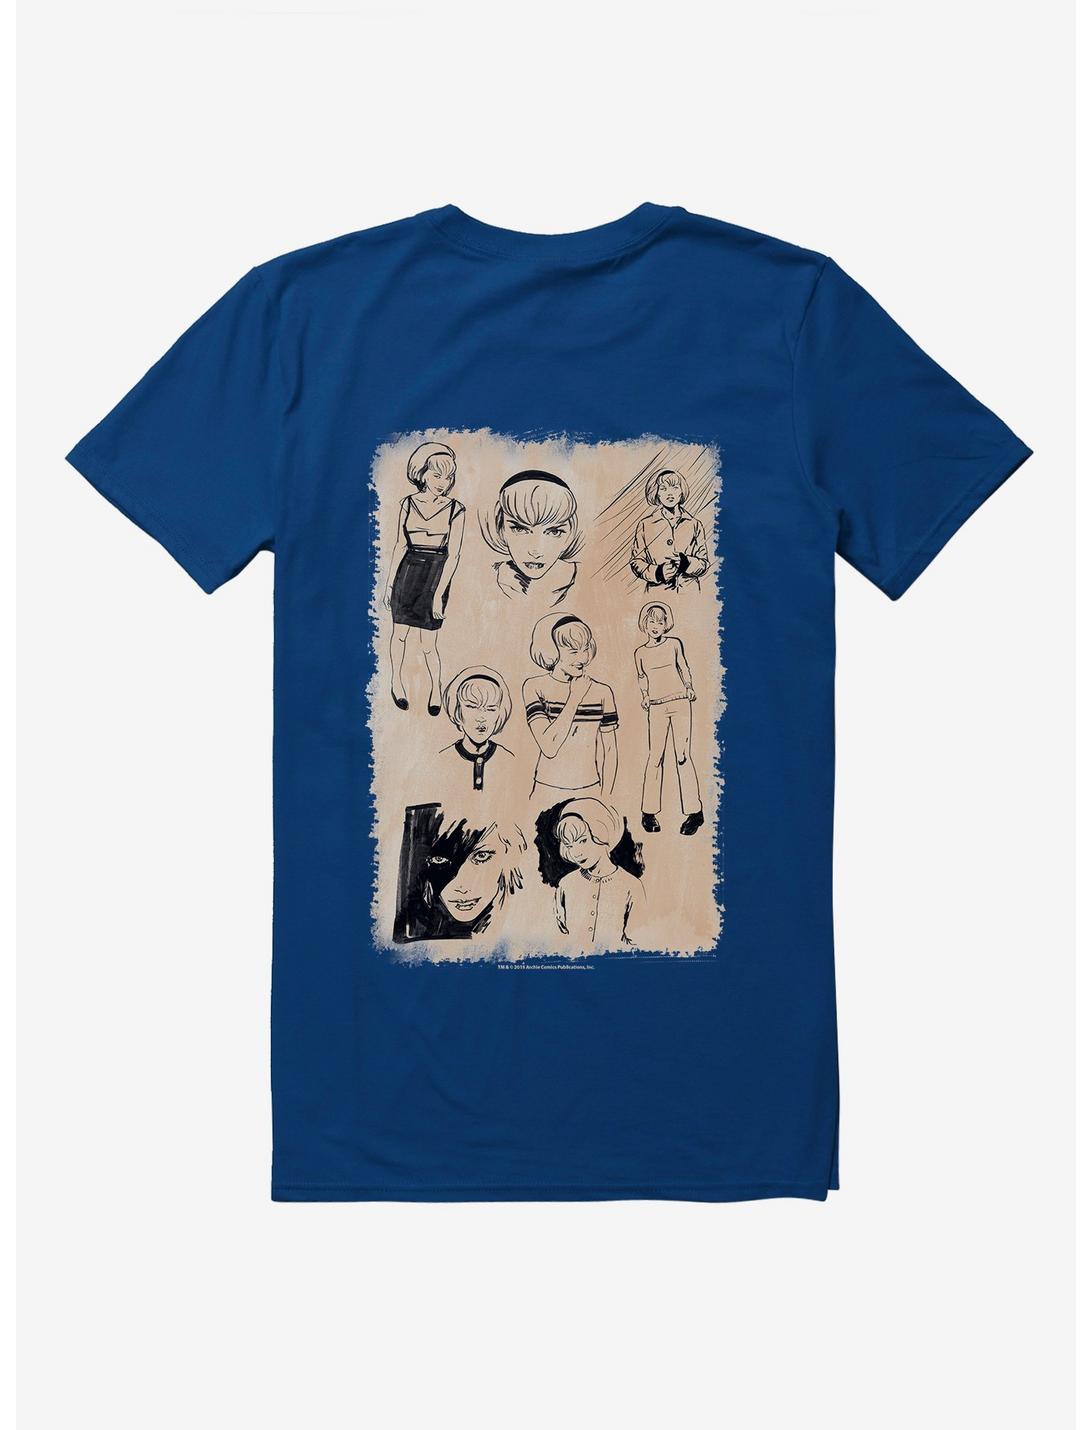 Chilling Adventures Of Sabrina Sketches White T-Shirt, NAVY, hi-res